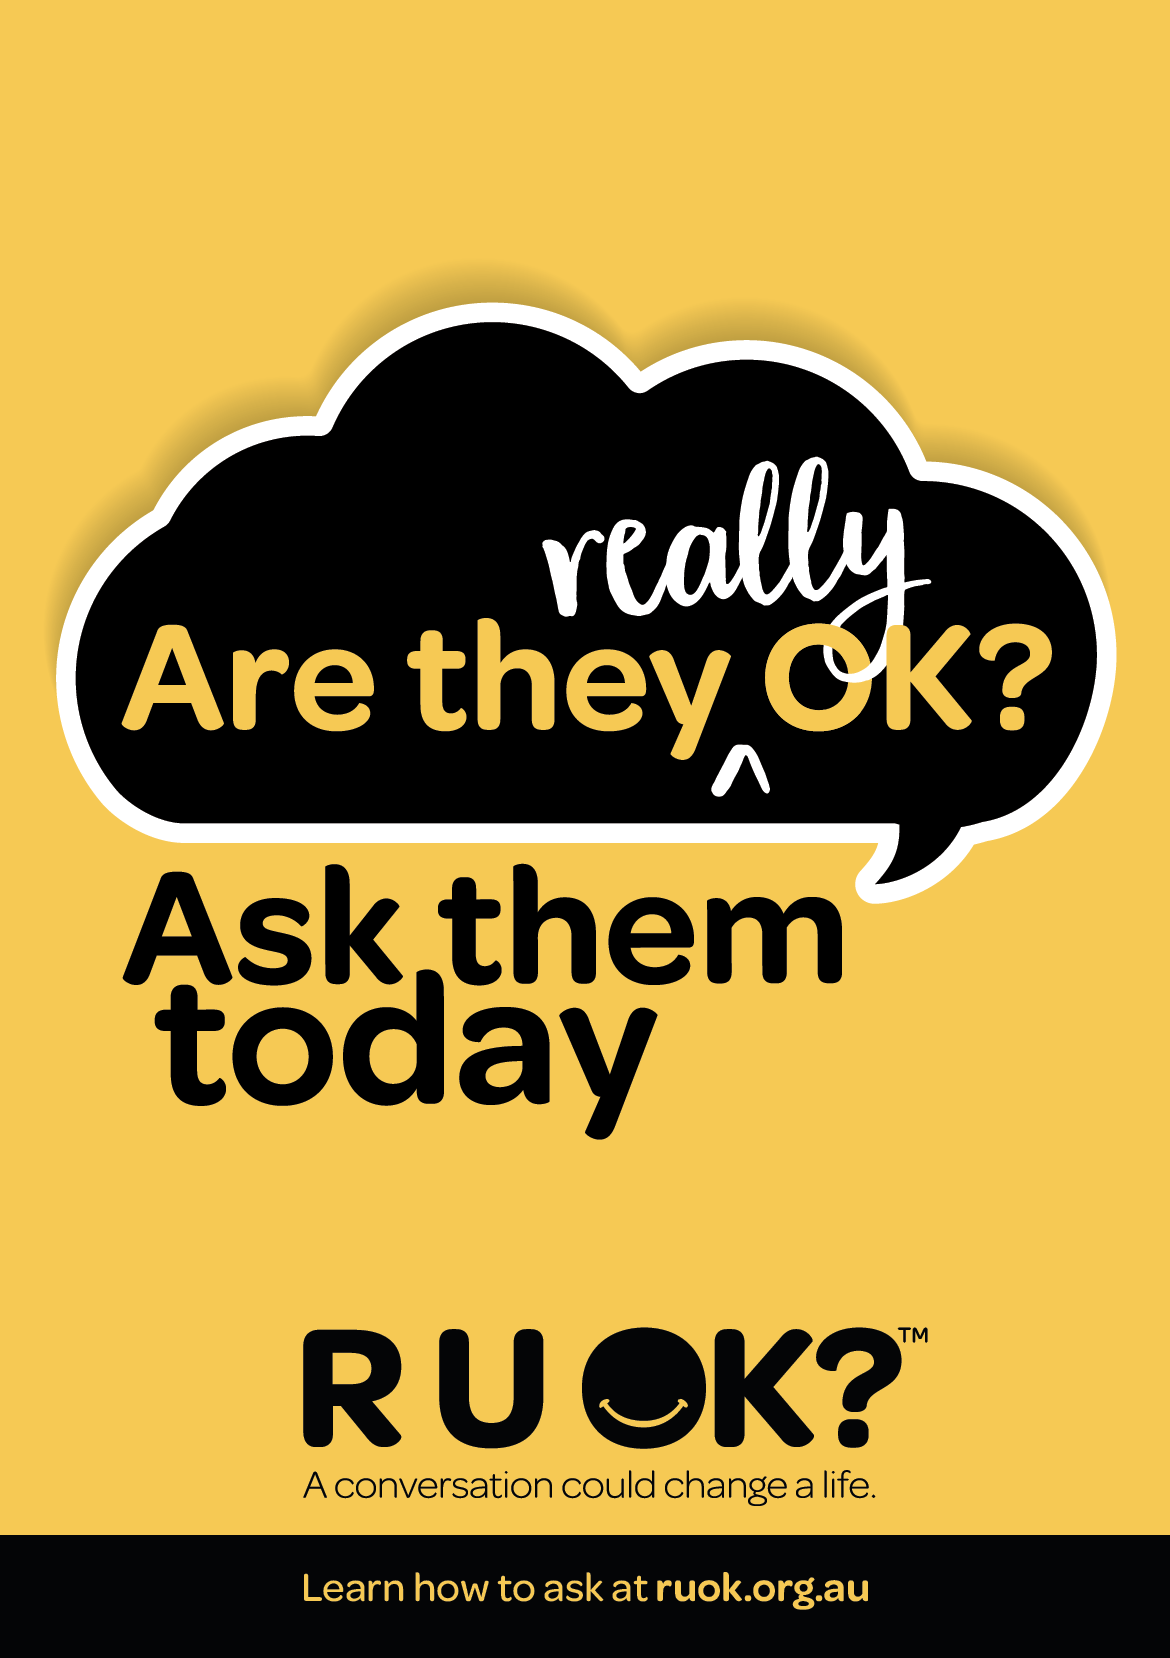 Ideas for supporting R U OK?Day while physical distancing